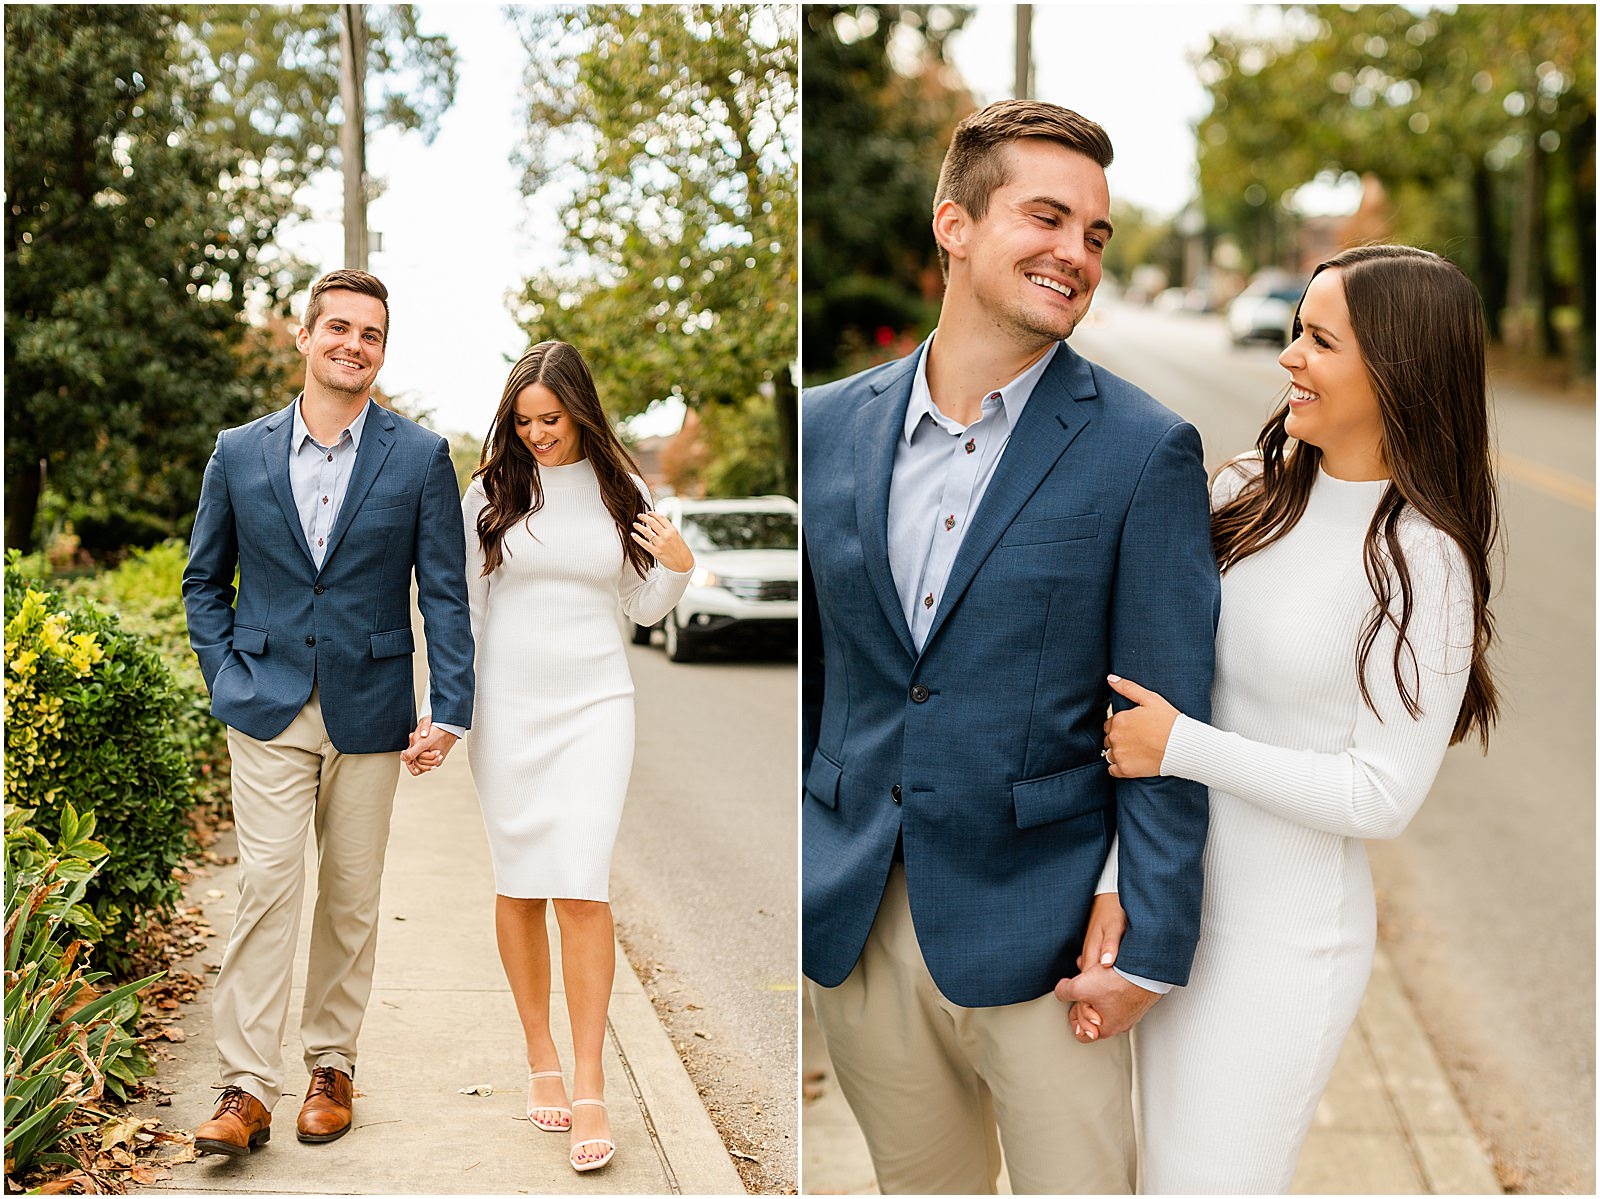 Emma and Jace's Downtown Newburgh Engagement Session | Bret and Brandie Photography | Evansville Indiana Wedding Photographers_0020.jpg